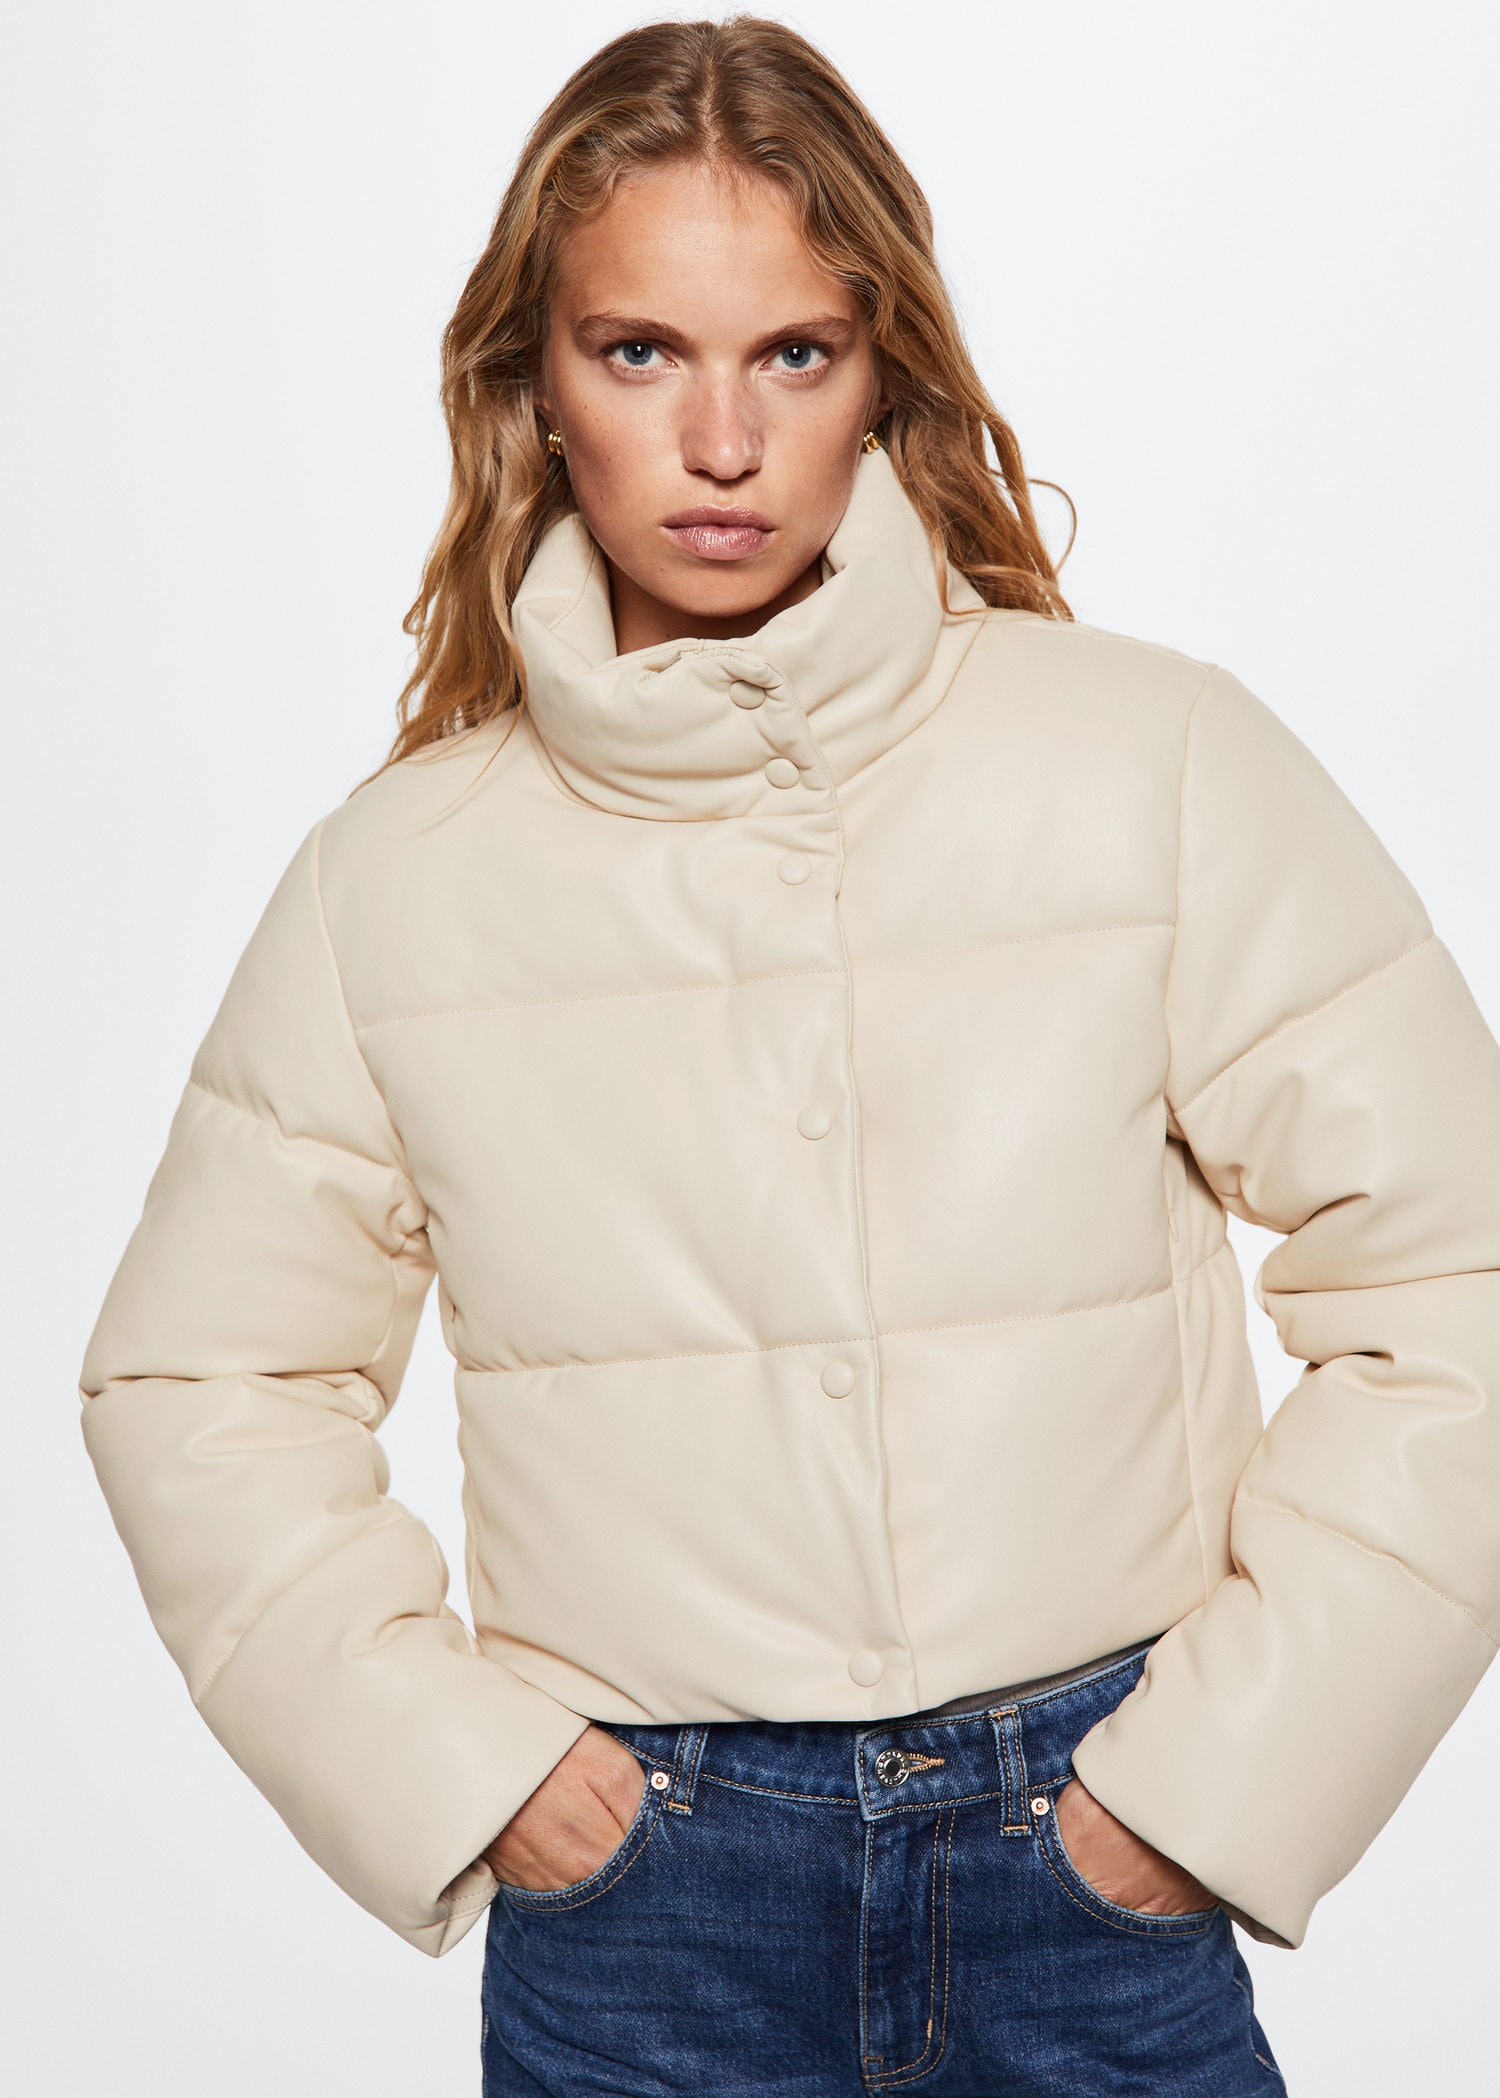 Quilted skin style jacket - Women | MANGO OUTLET USA